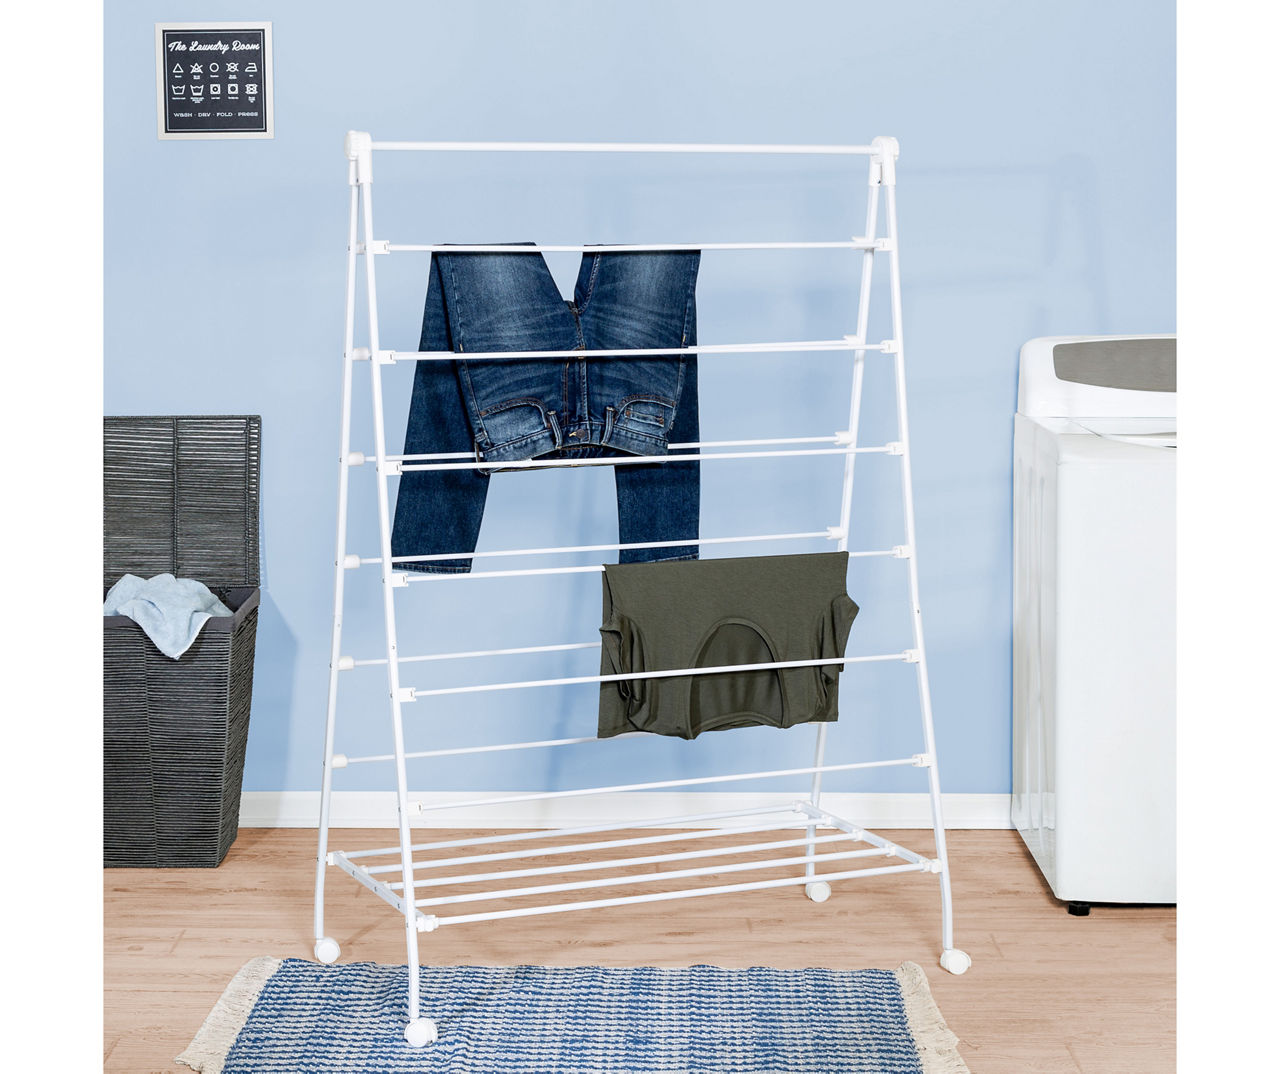 Honey-Can-Do Compact Folding Metal Clothes Drying Rack 